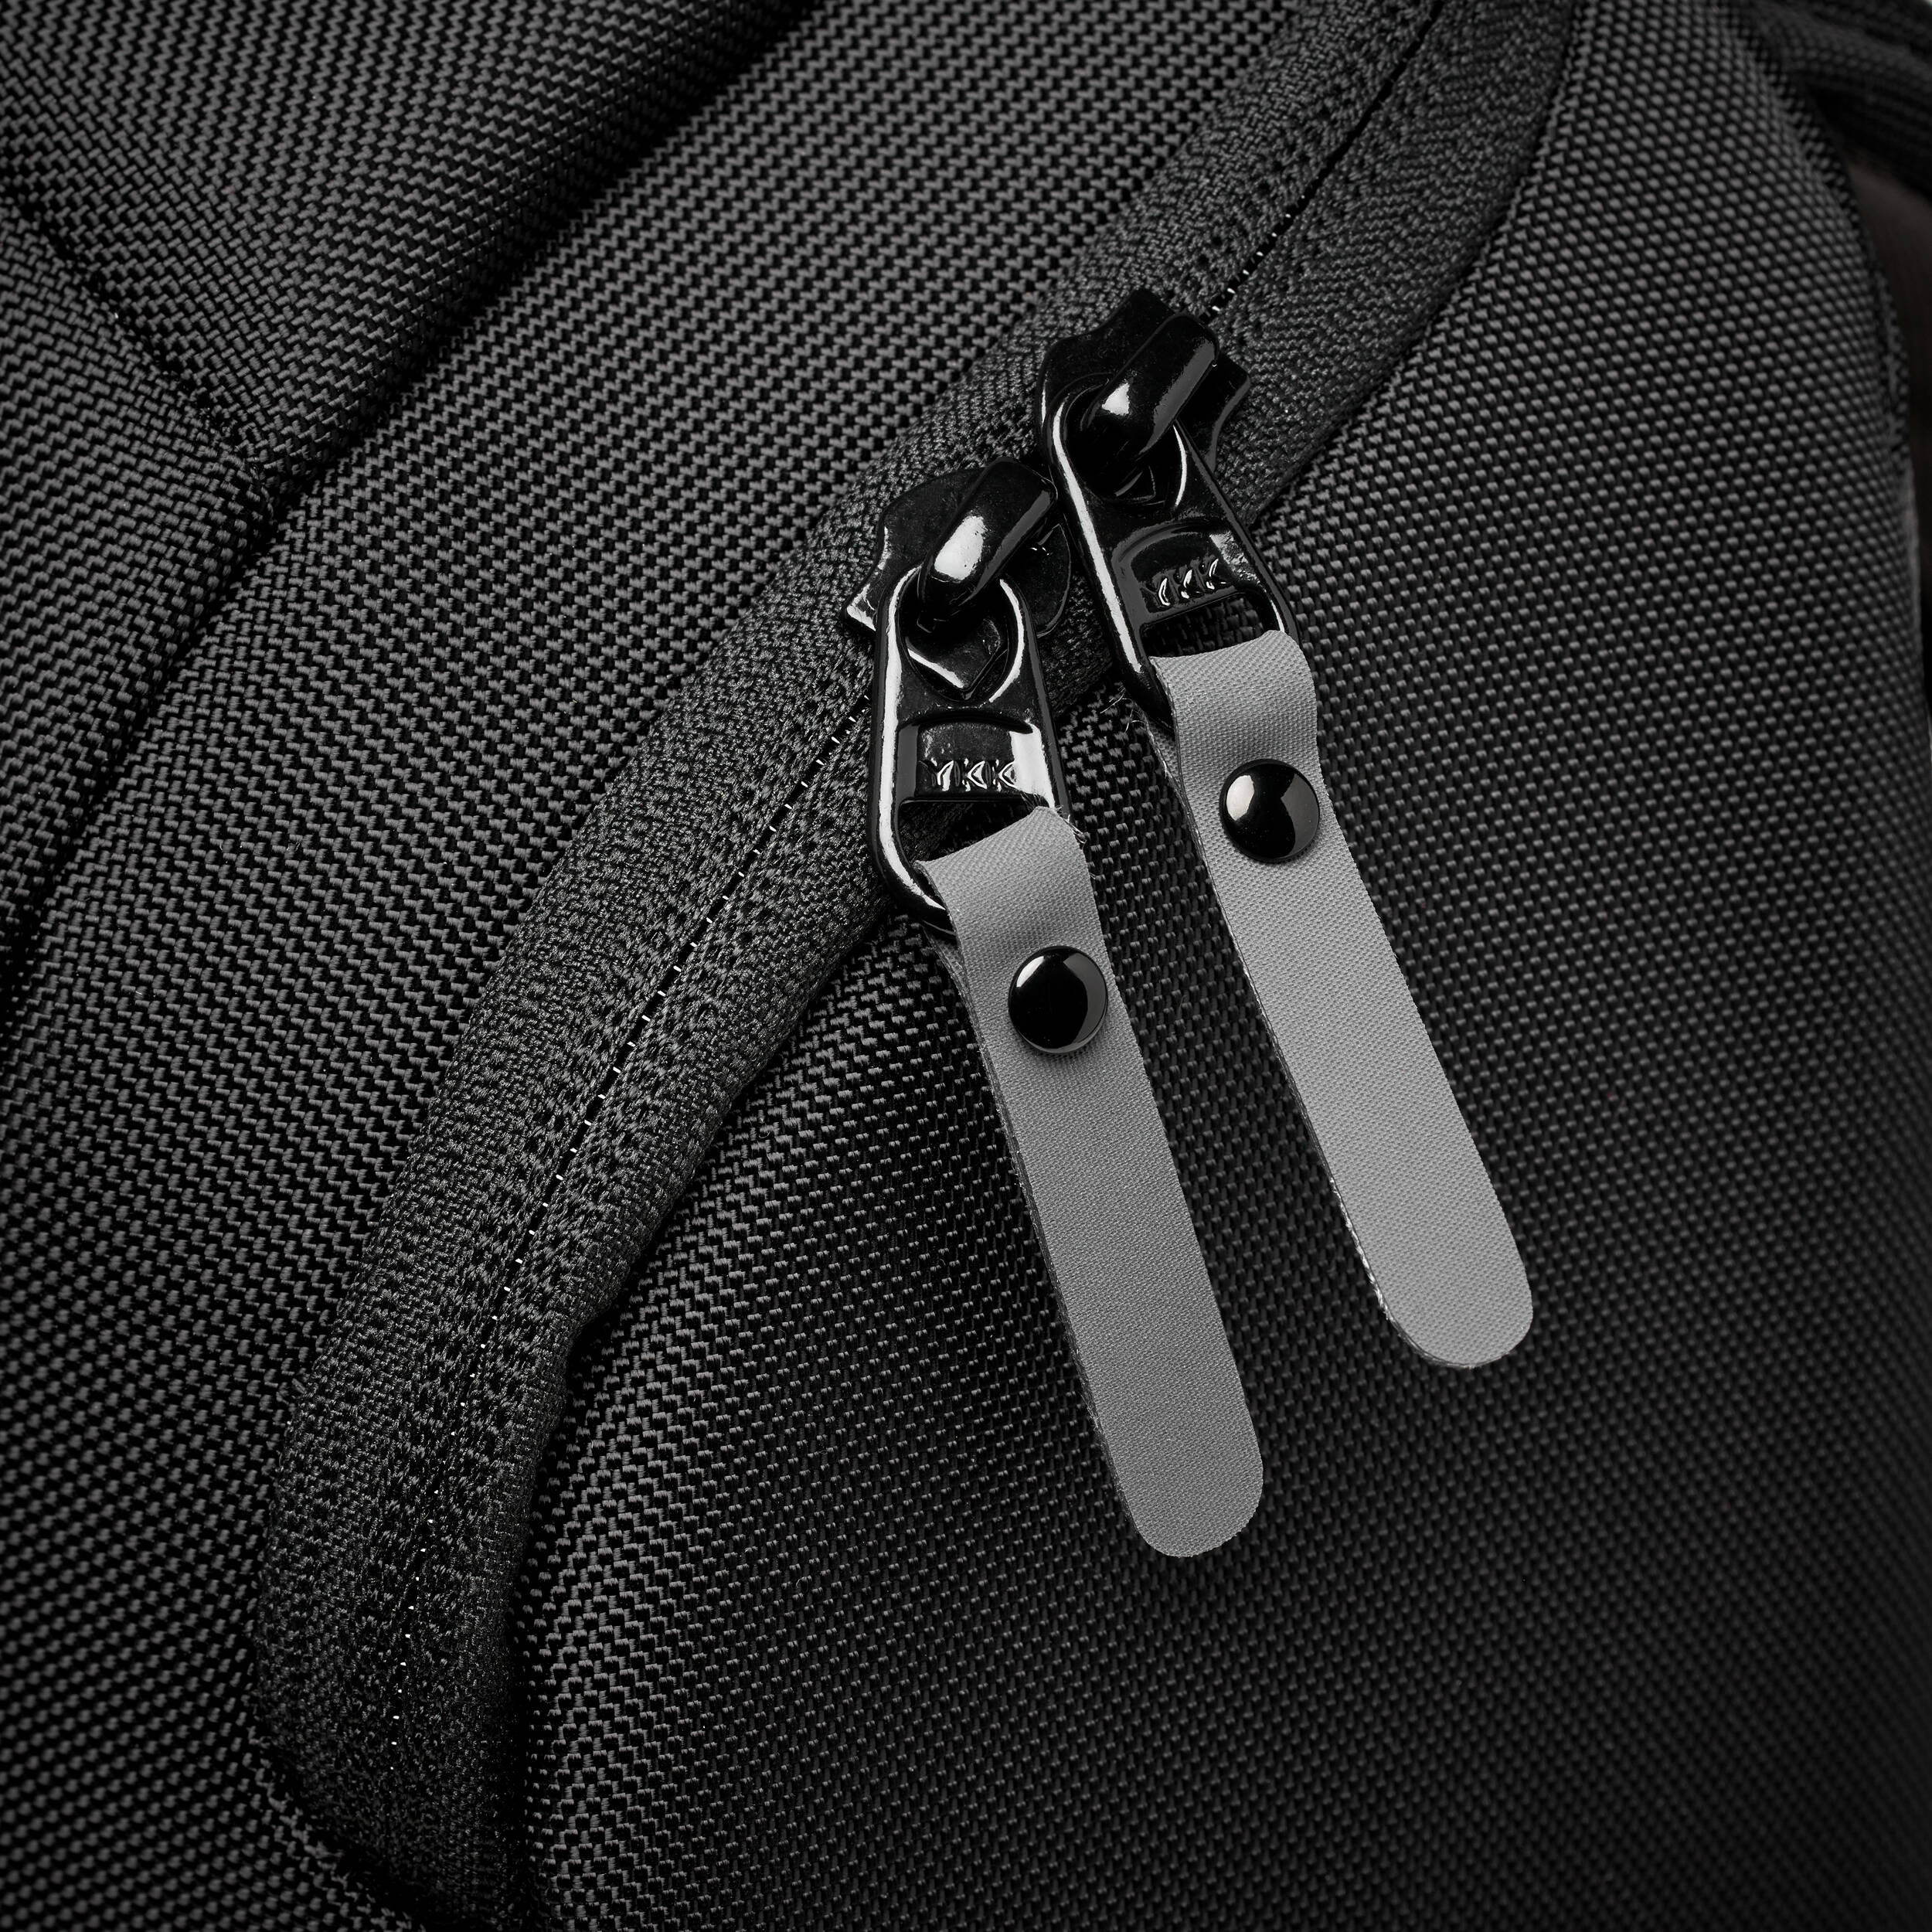 Manfrotto bag.  ADVANCED COMPACT BACKPACK III